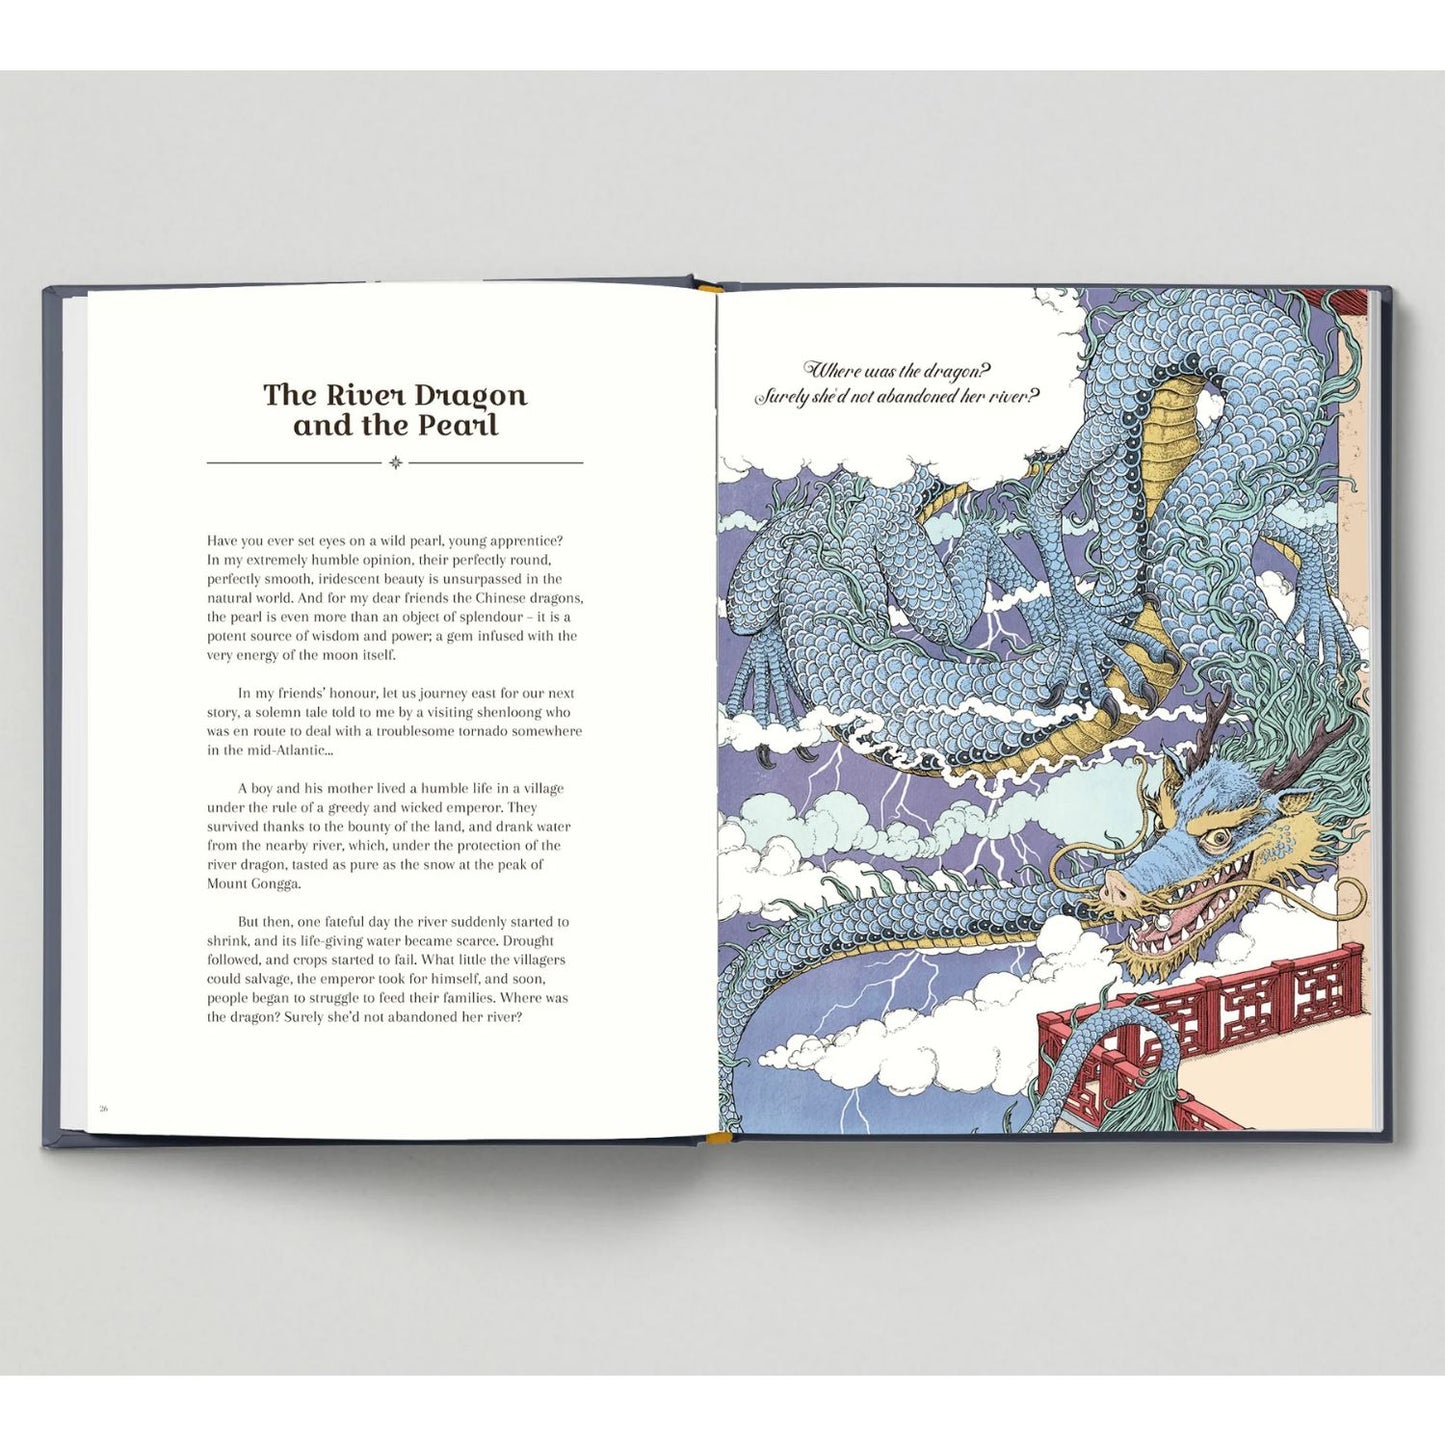 Dragon Lore | Hardcover | Kids’ Books on Myths, Tales & Legends